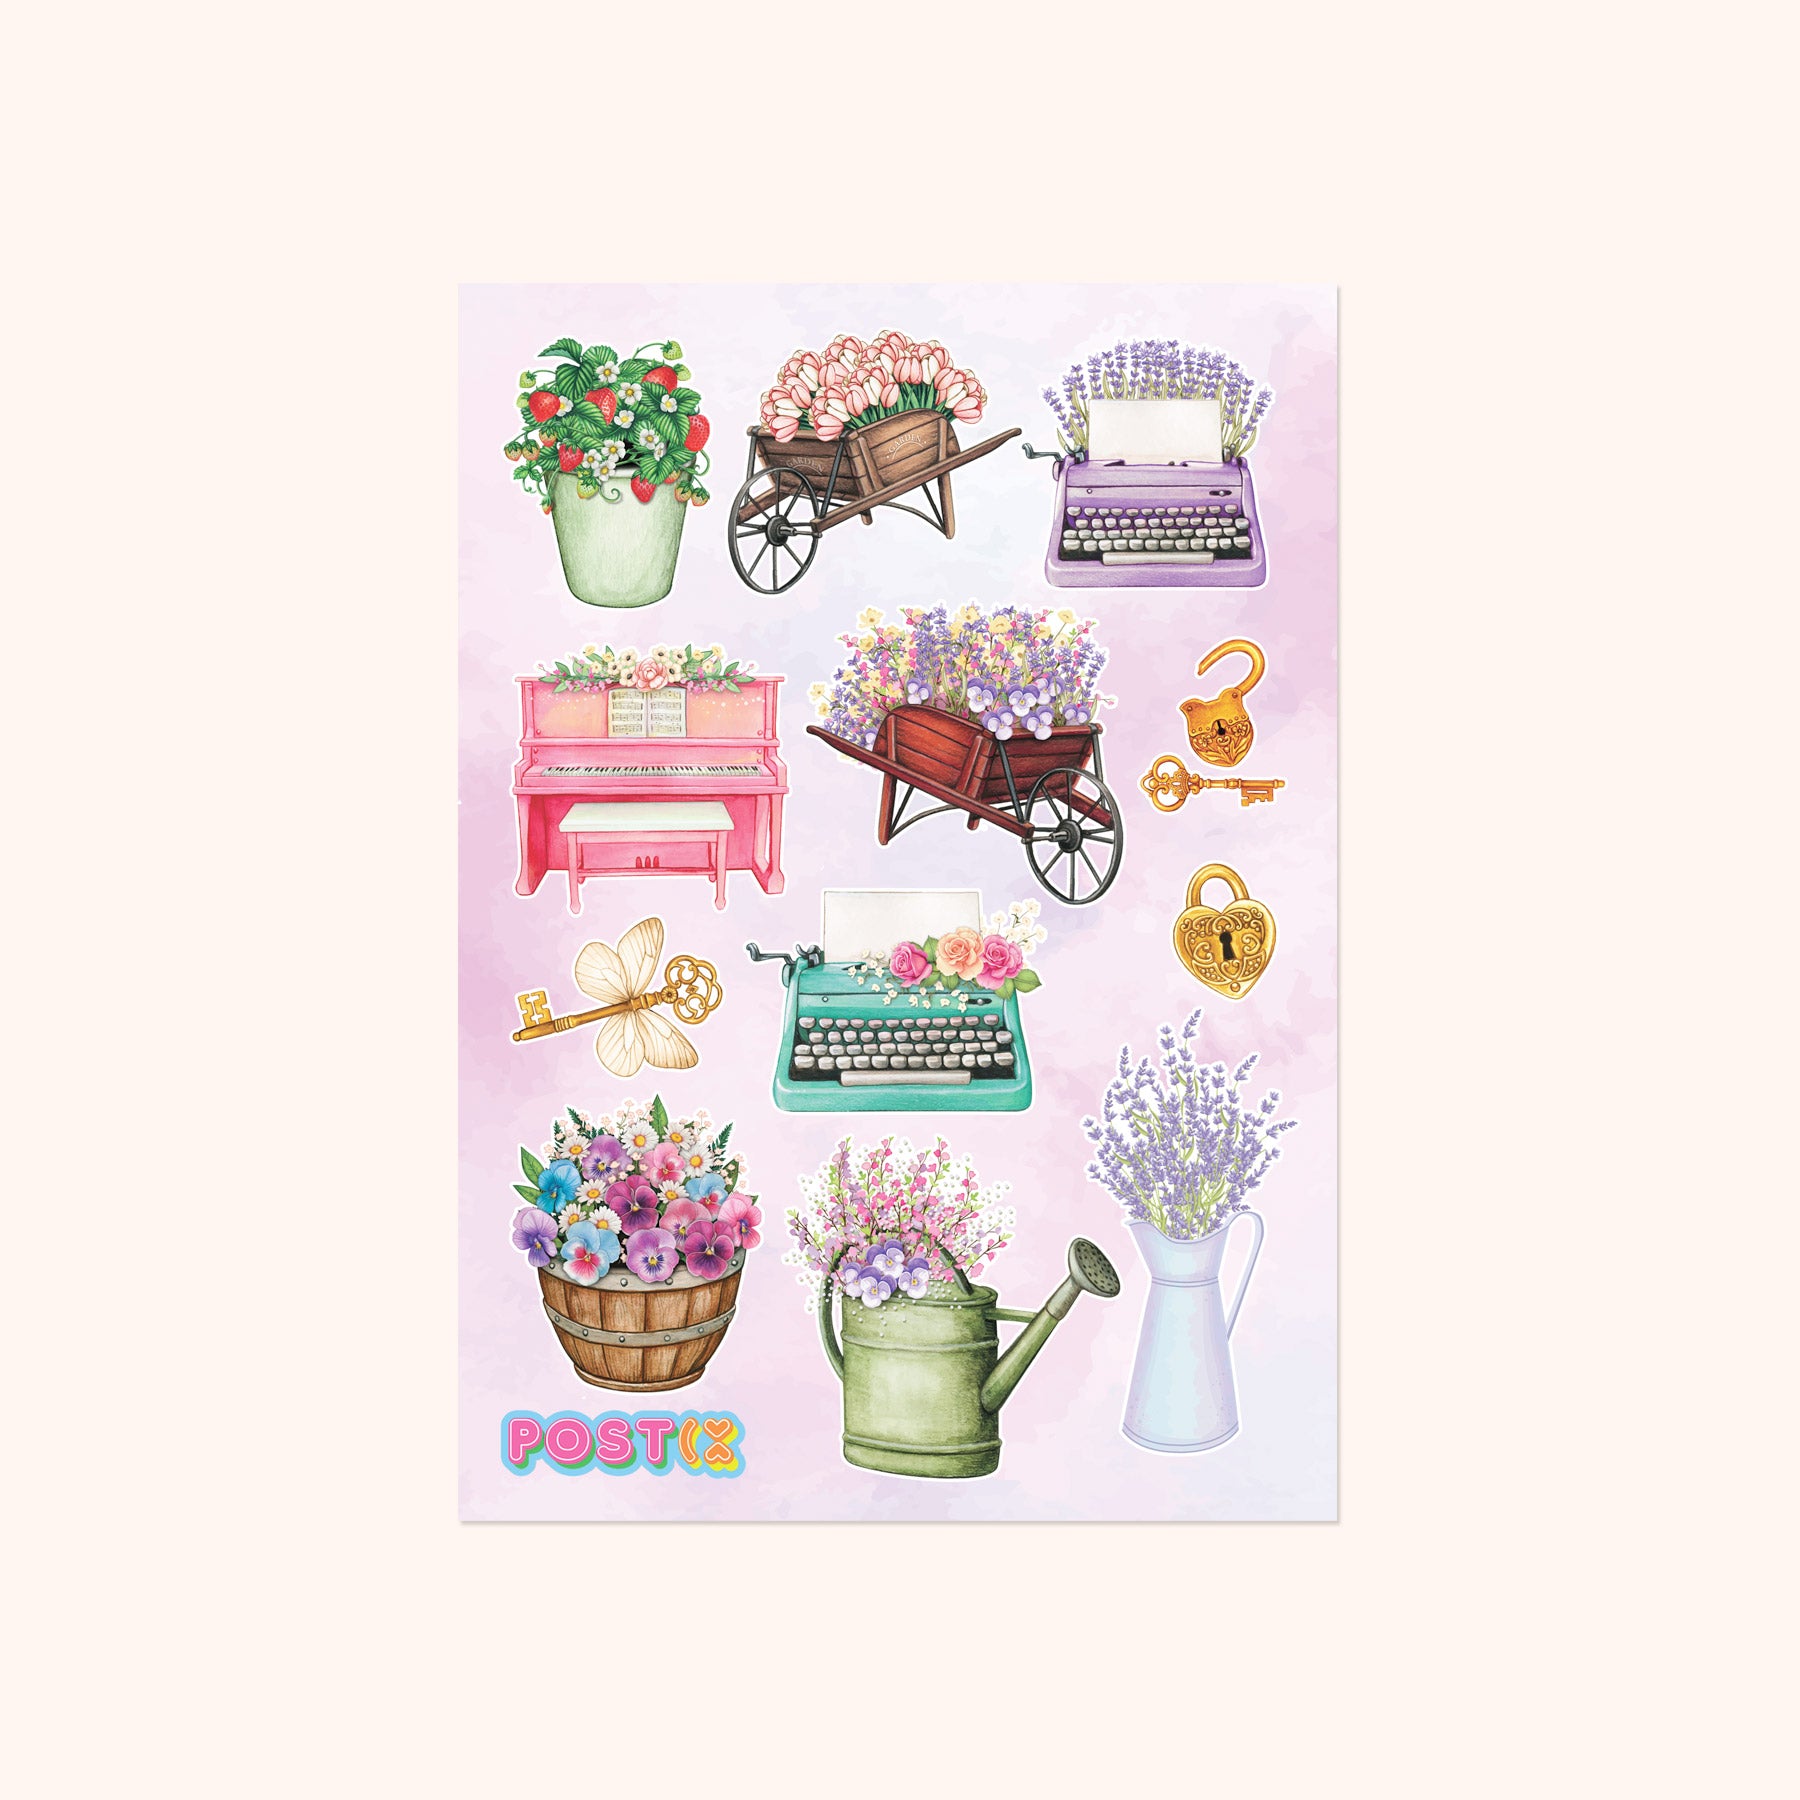 Vintage Decor and Blooms A6 Washi Sticker Sheet